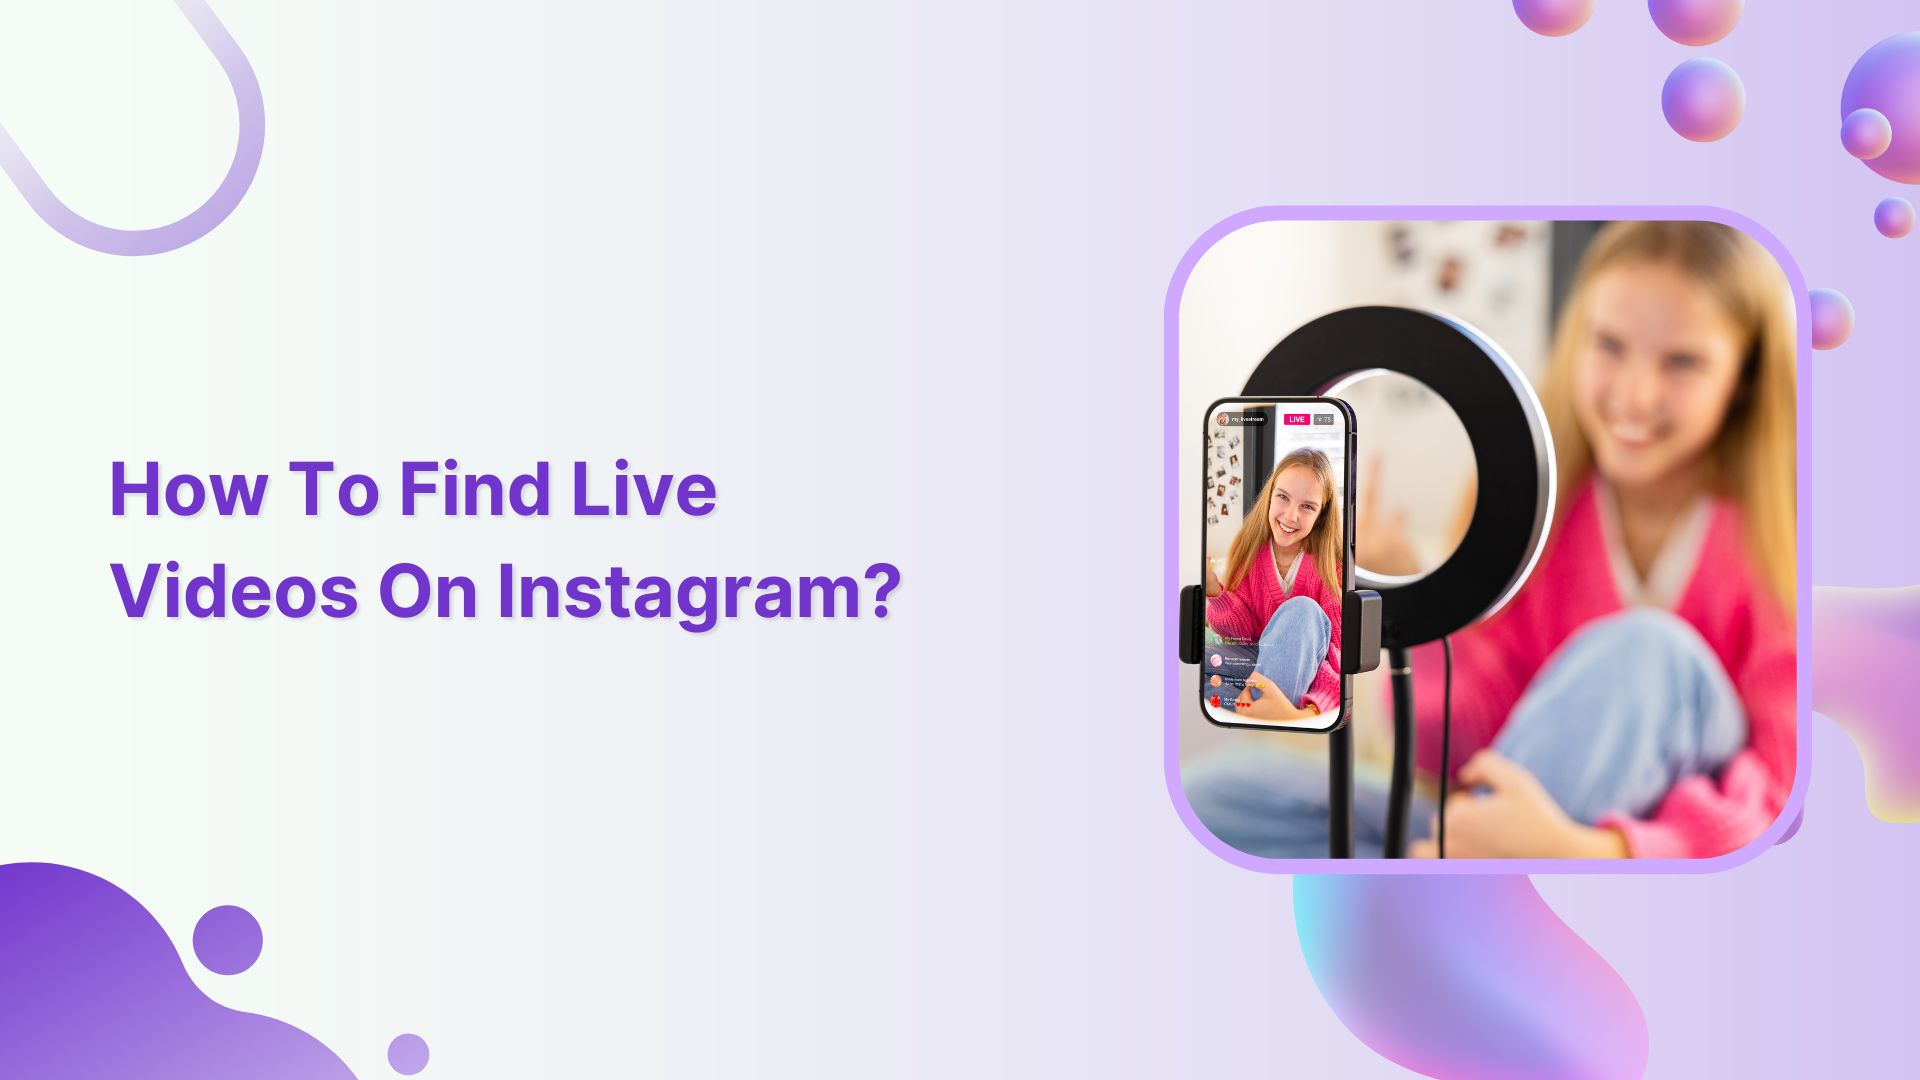 How to find live videos on Instagram?